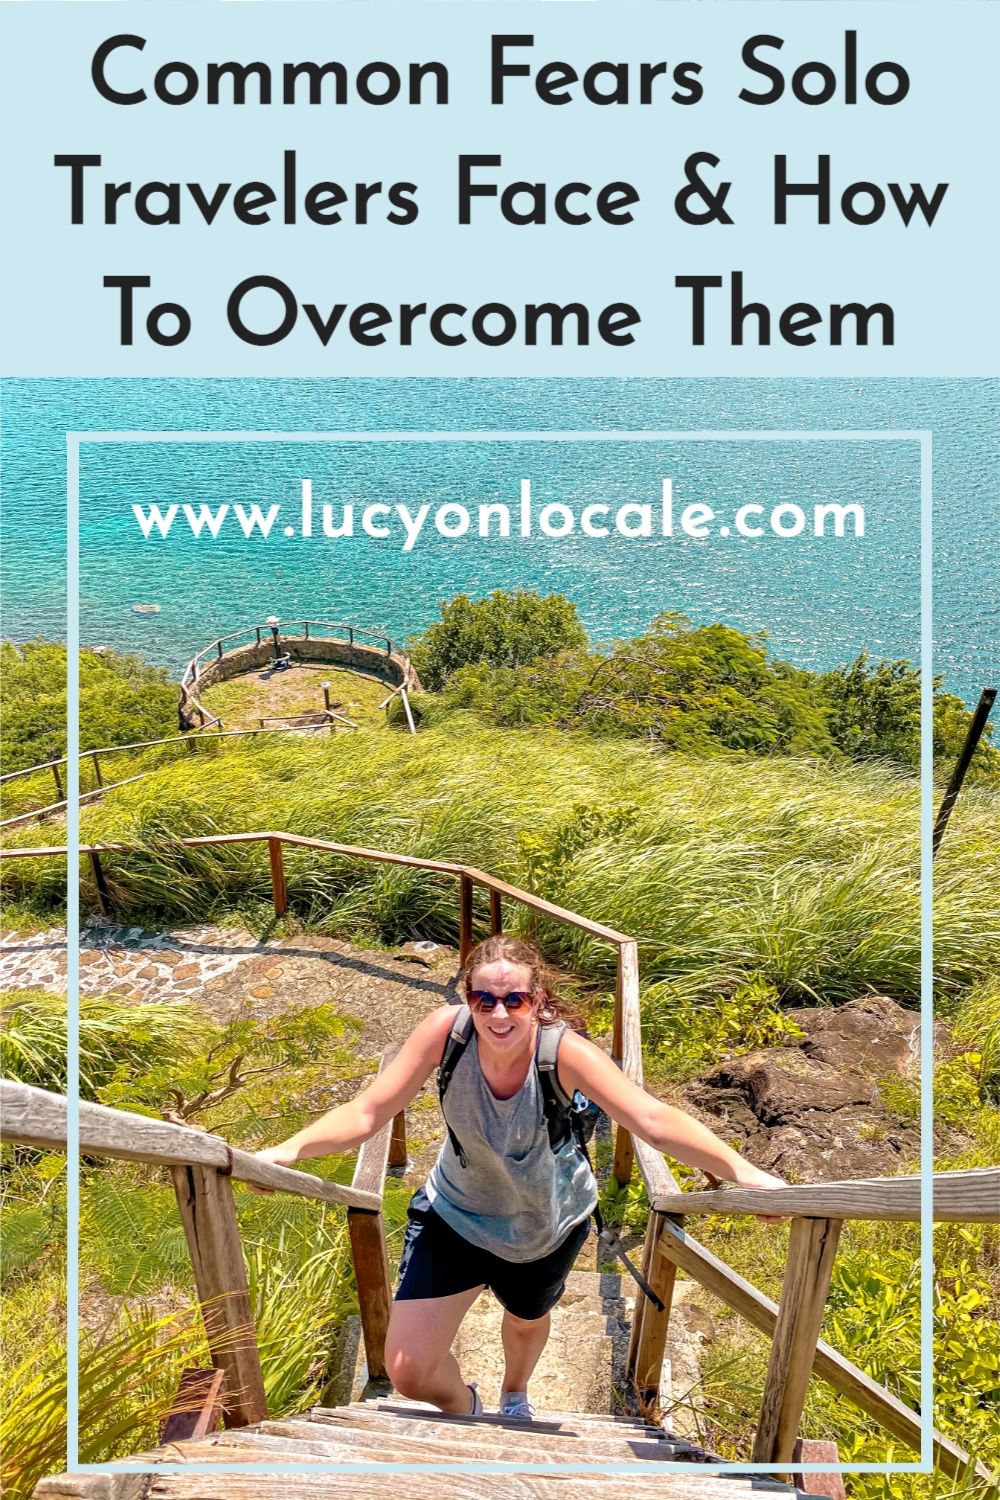 Common fears solo travelers face and how to overcome them